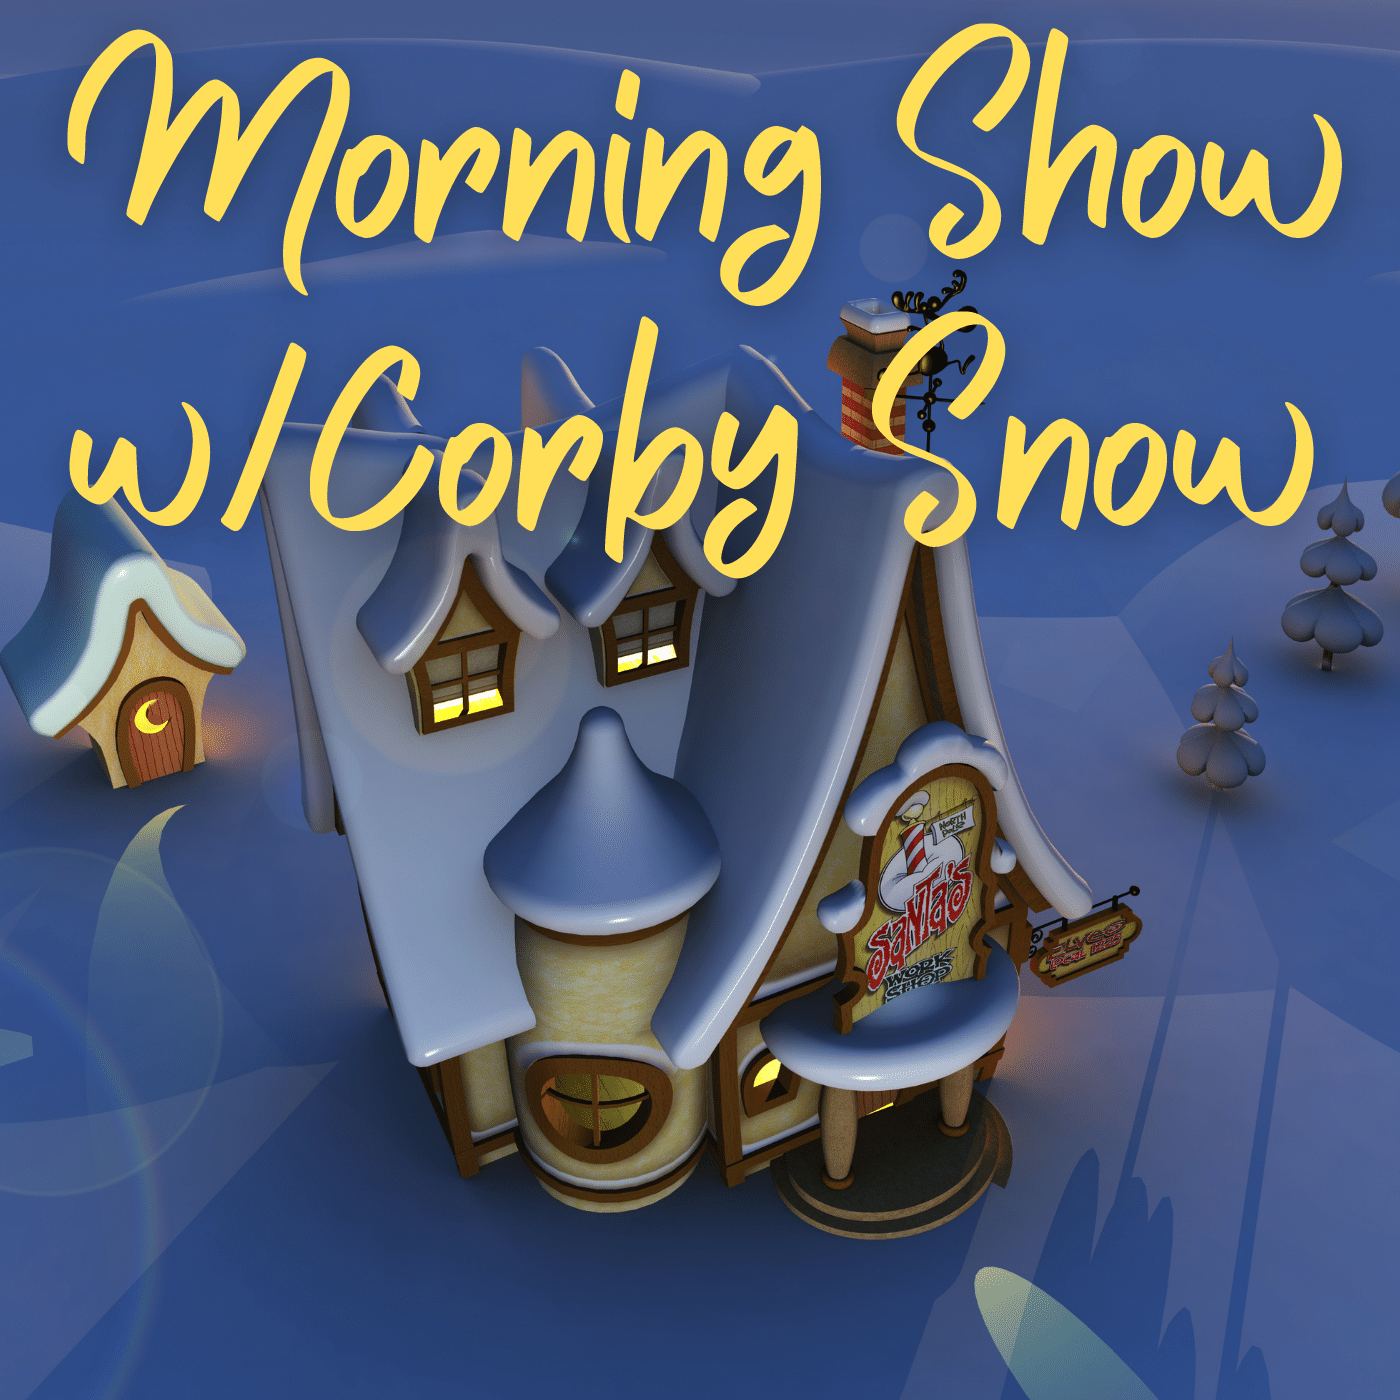 Morning Show with Corby Snow